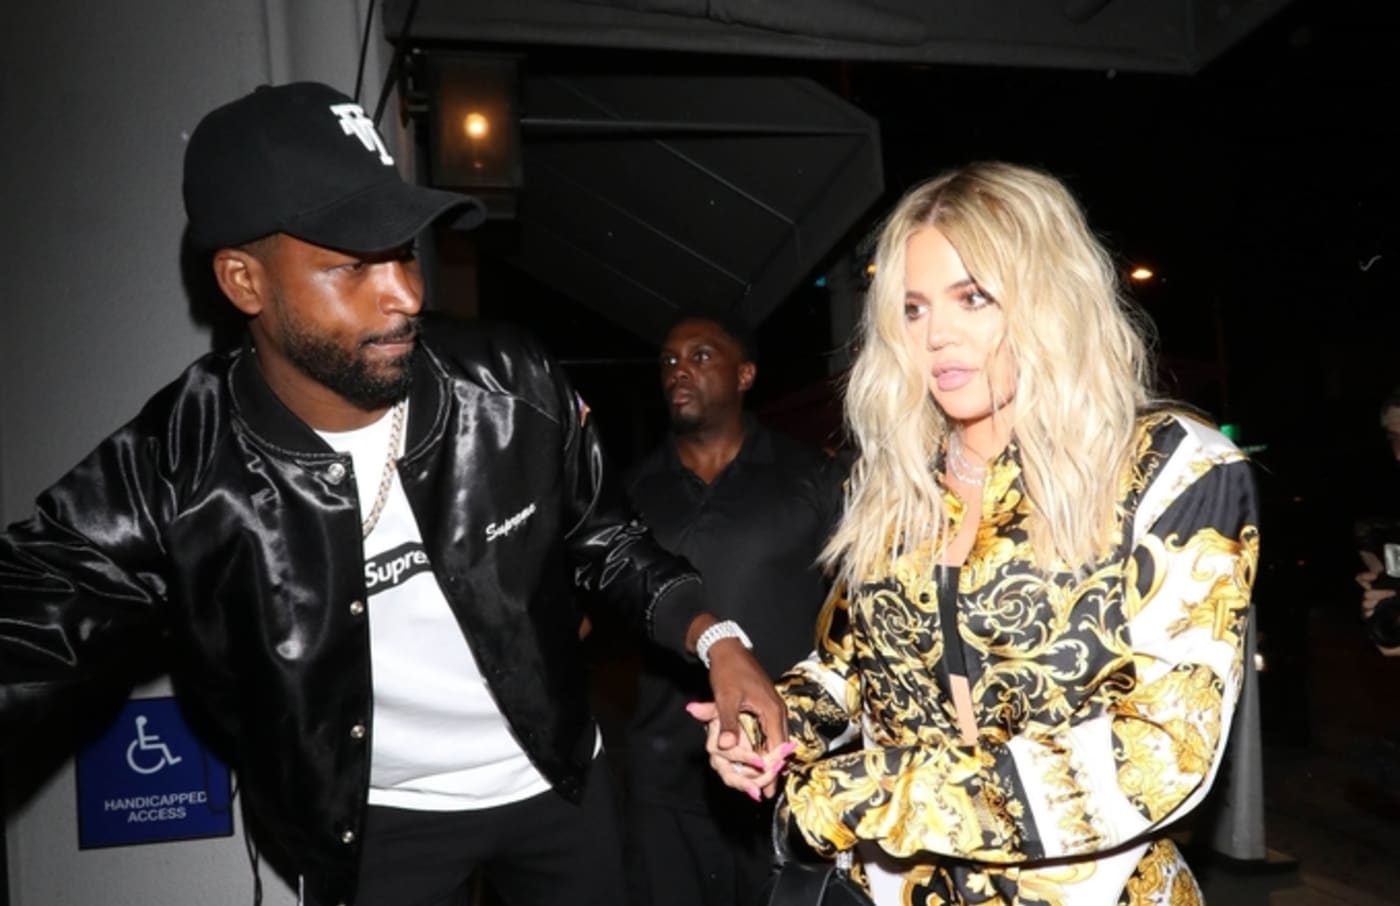 Khloé Kardashian Denies Claims She Cheated With Tristan He Ex | Complex